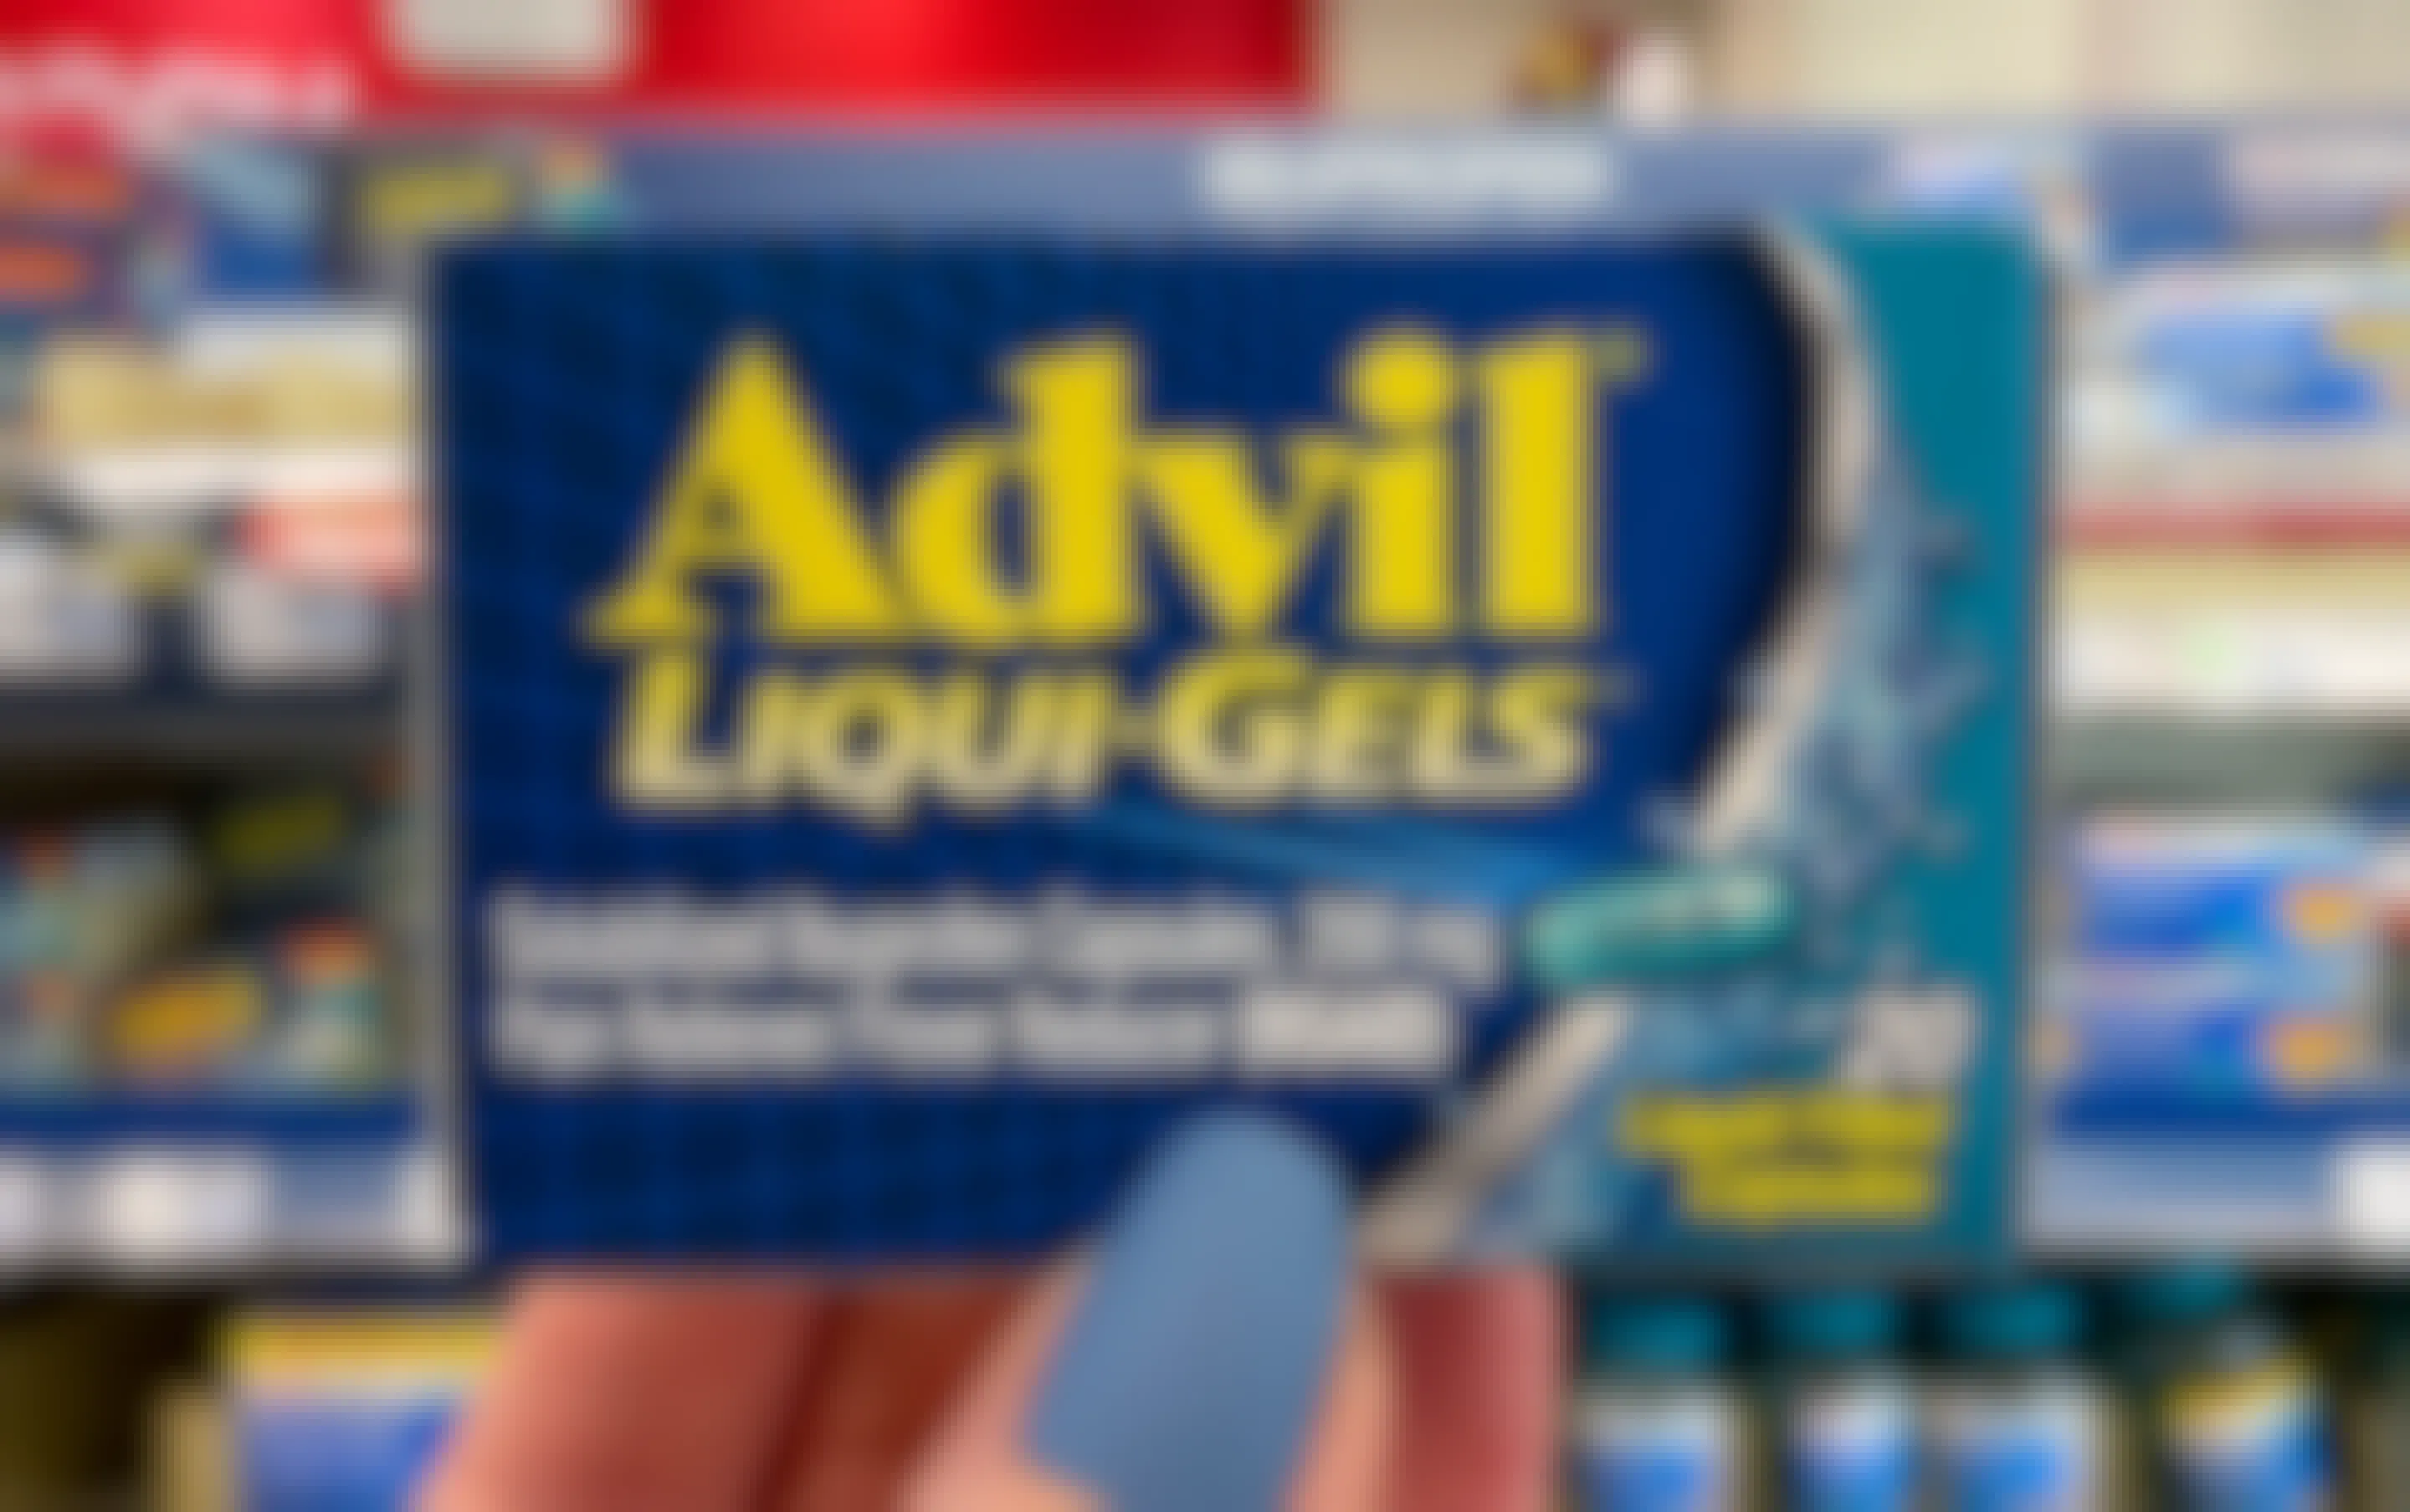 A person's hand holding up a box of advil liquid gels in store.